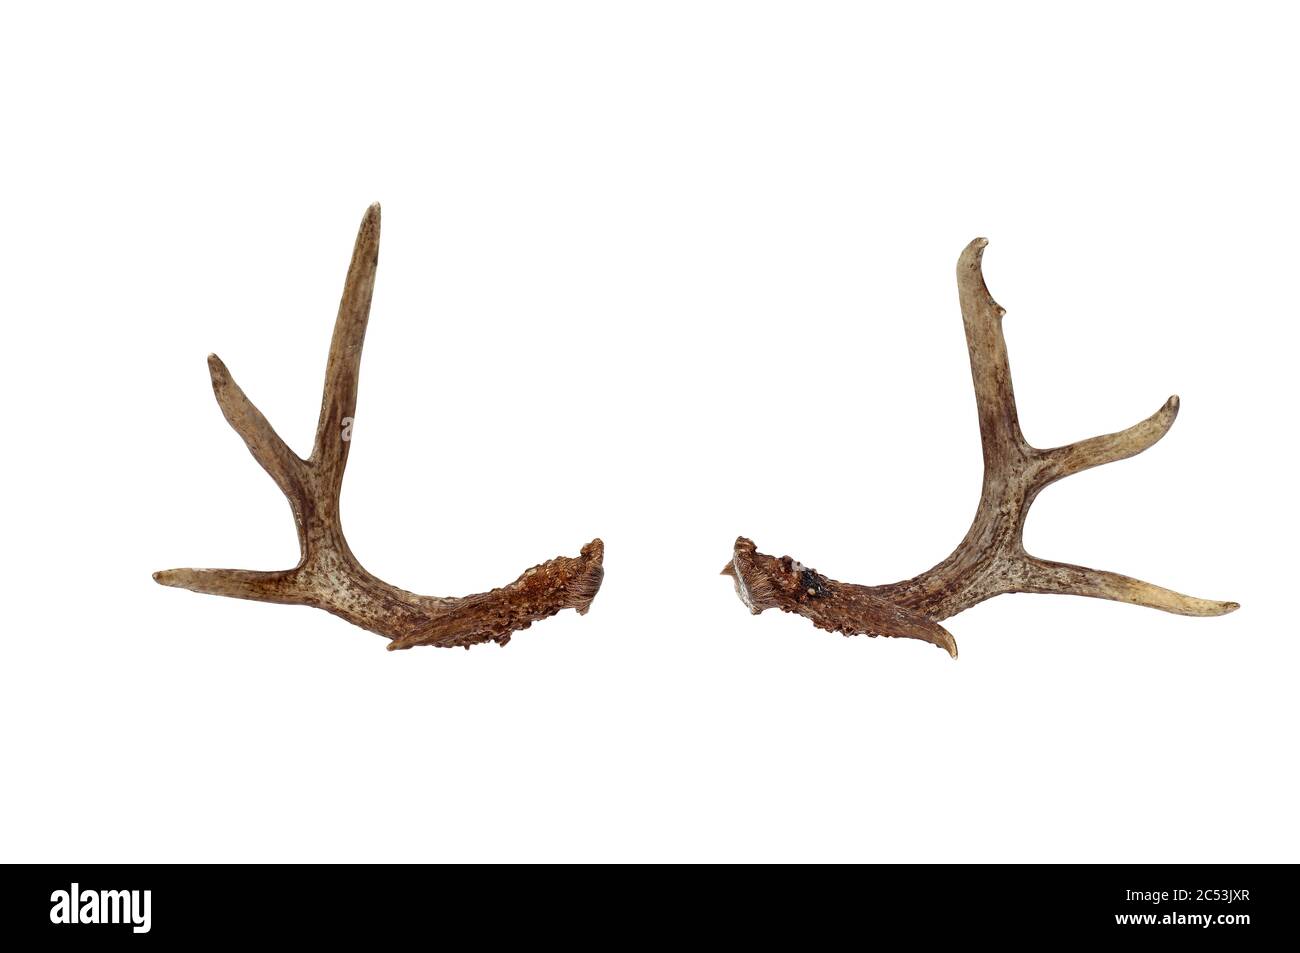 Real deer antlers isolated of a white background with clipping path included. Stock Photo